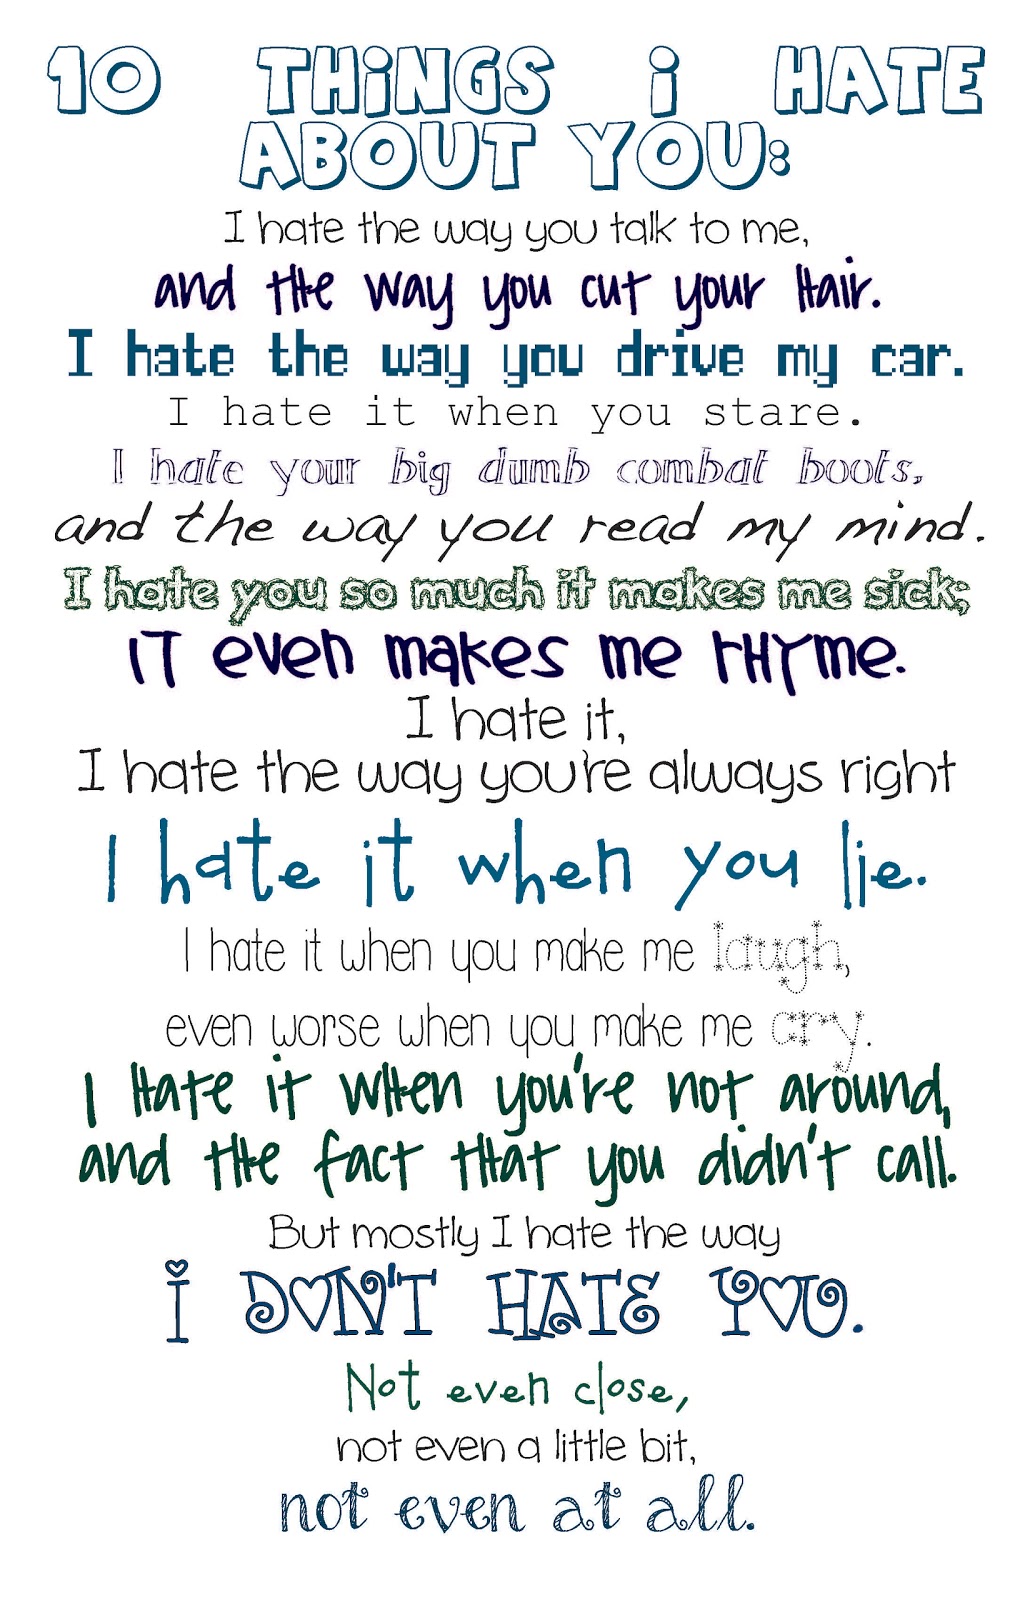 10 Things I Hate About You - Wikipedia